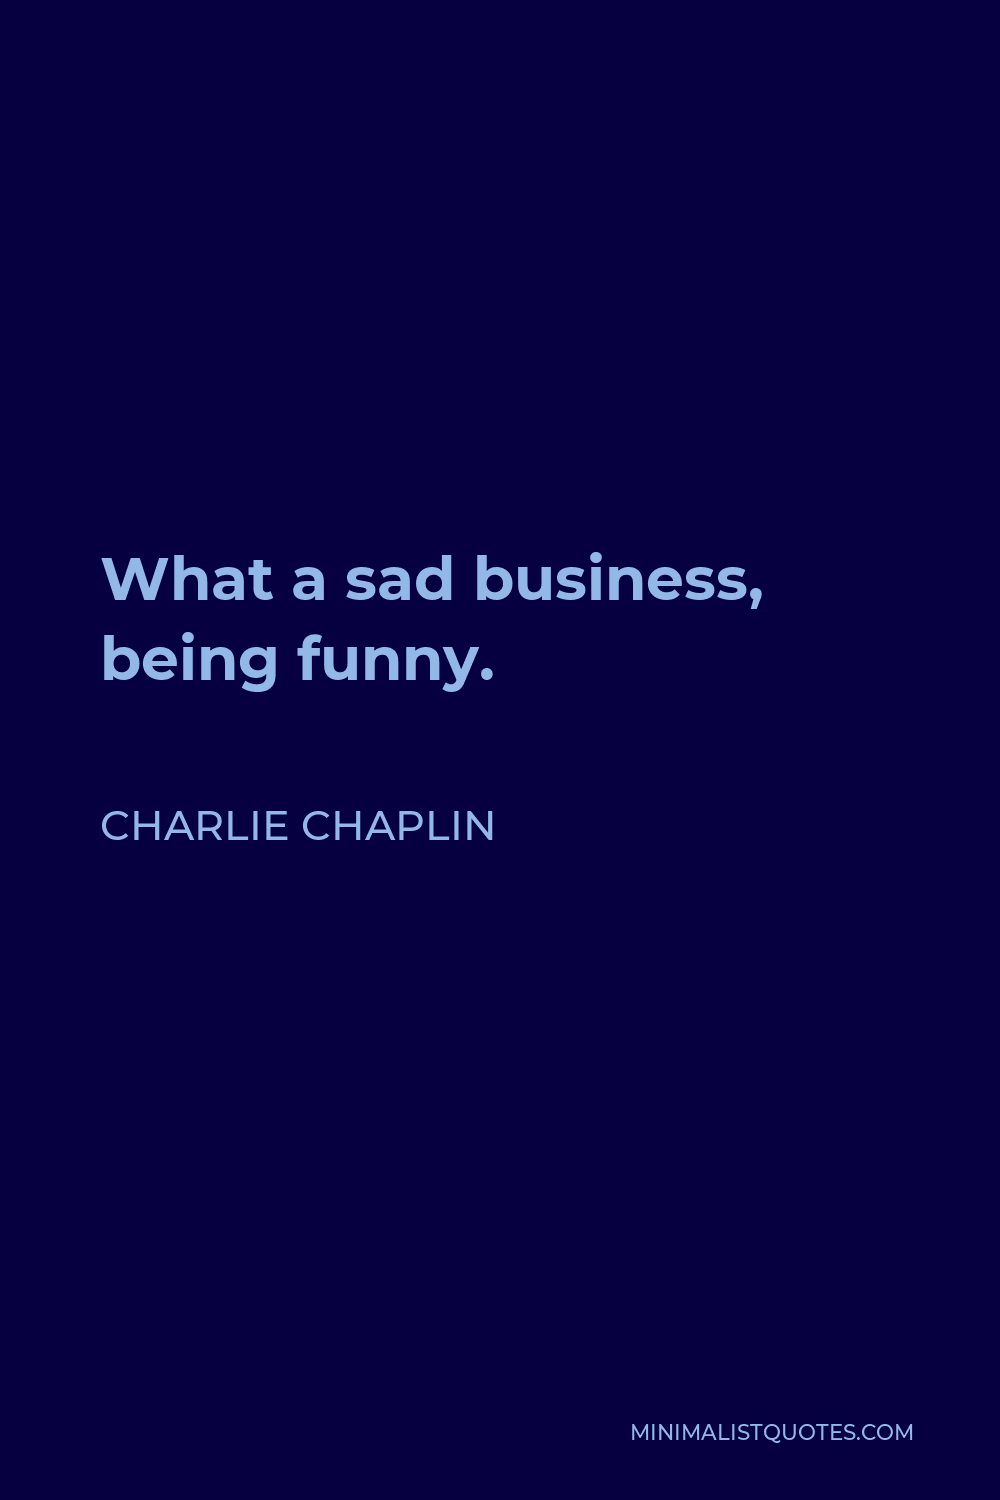 Charlie Chaplin Quote - What a sad business, being funny.